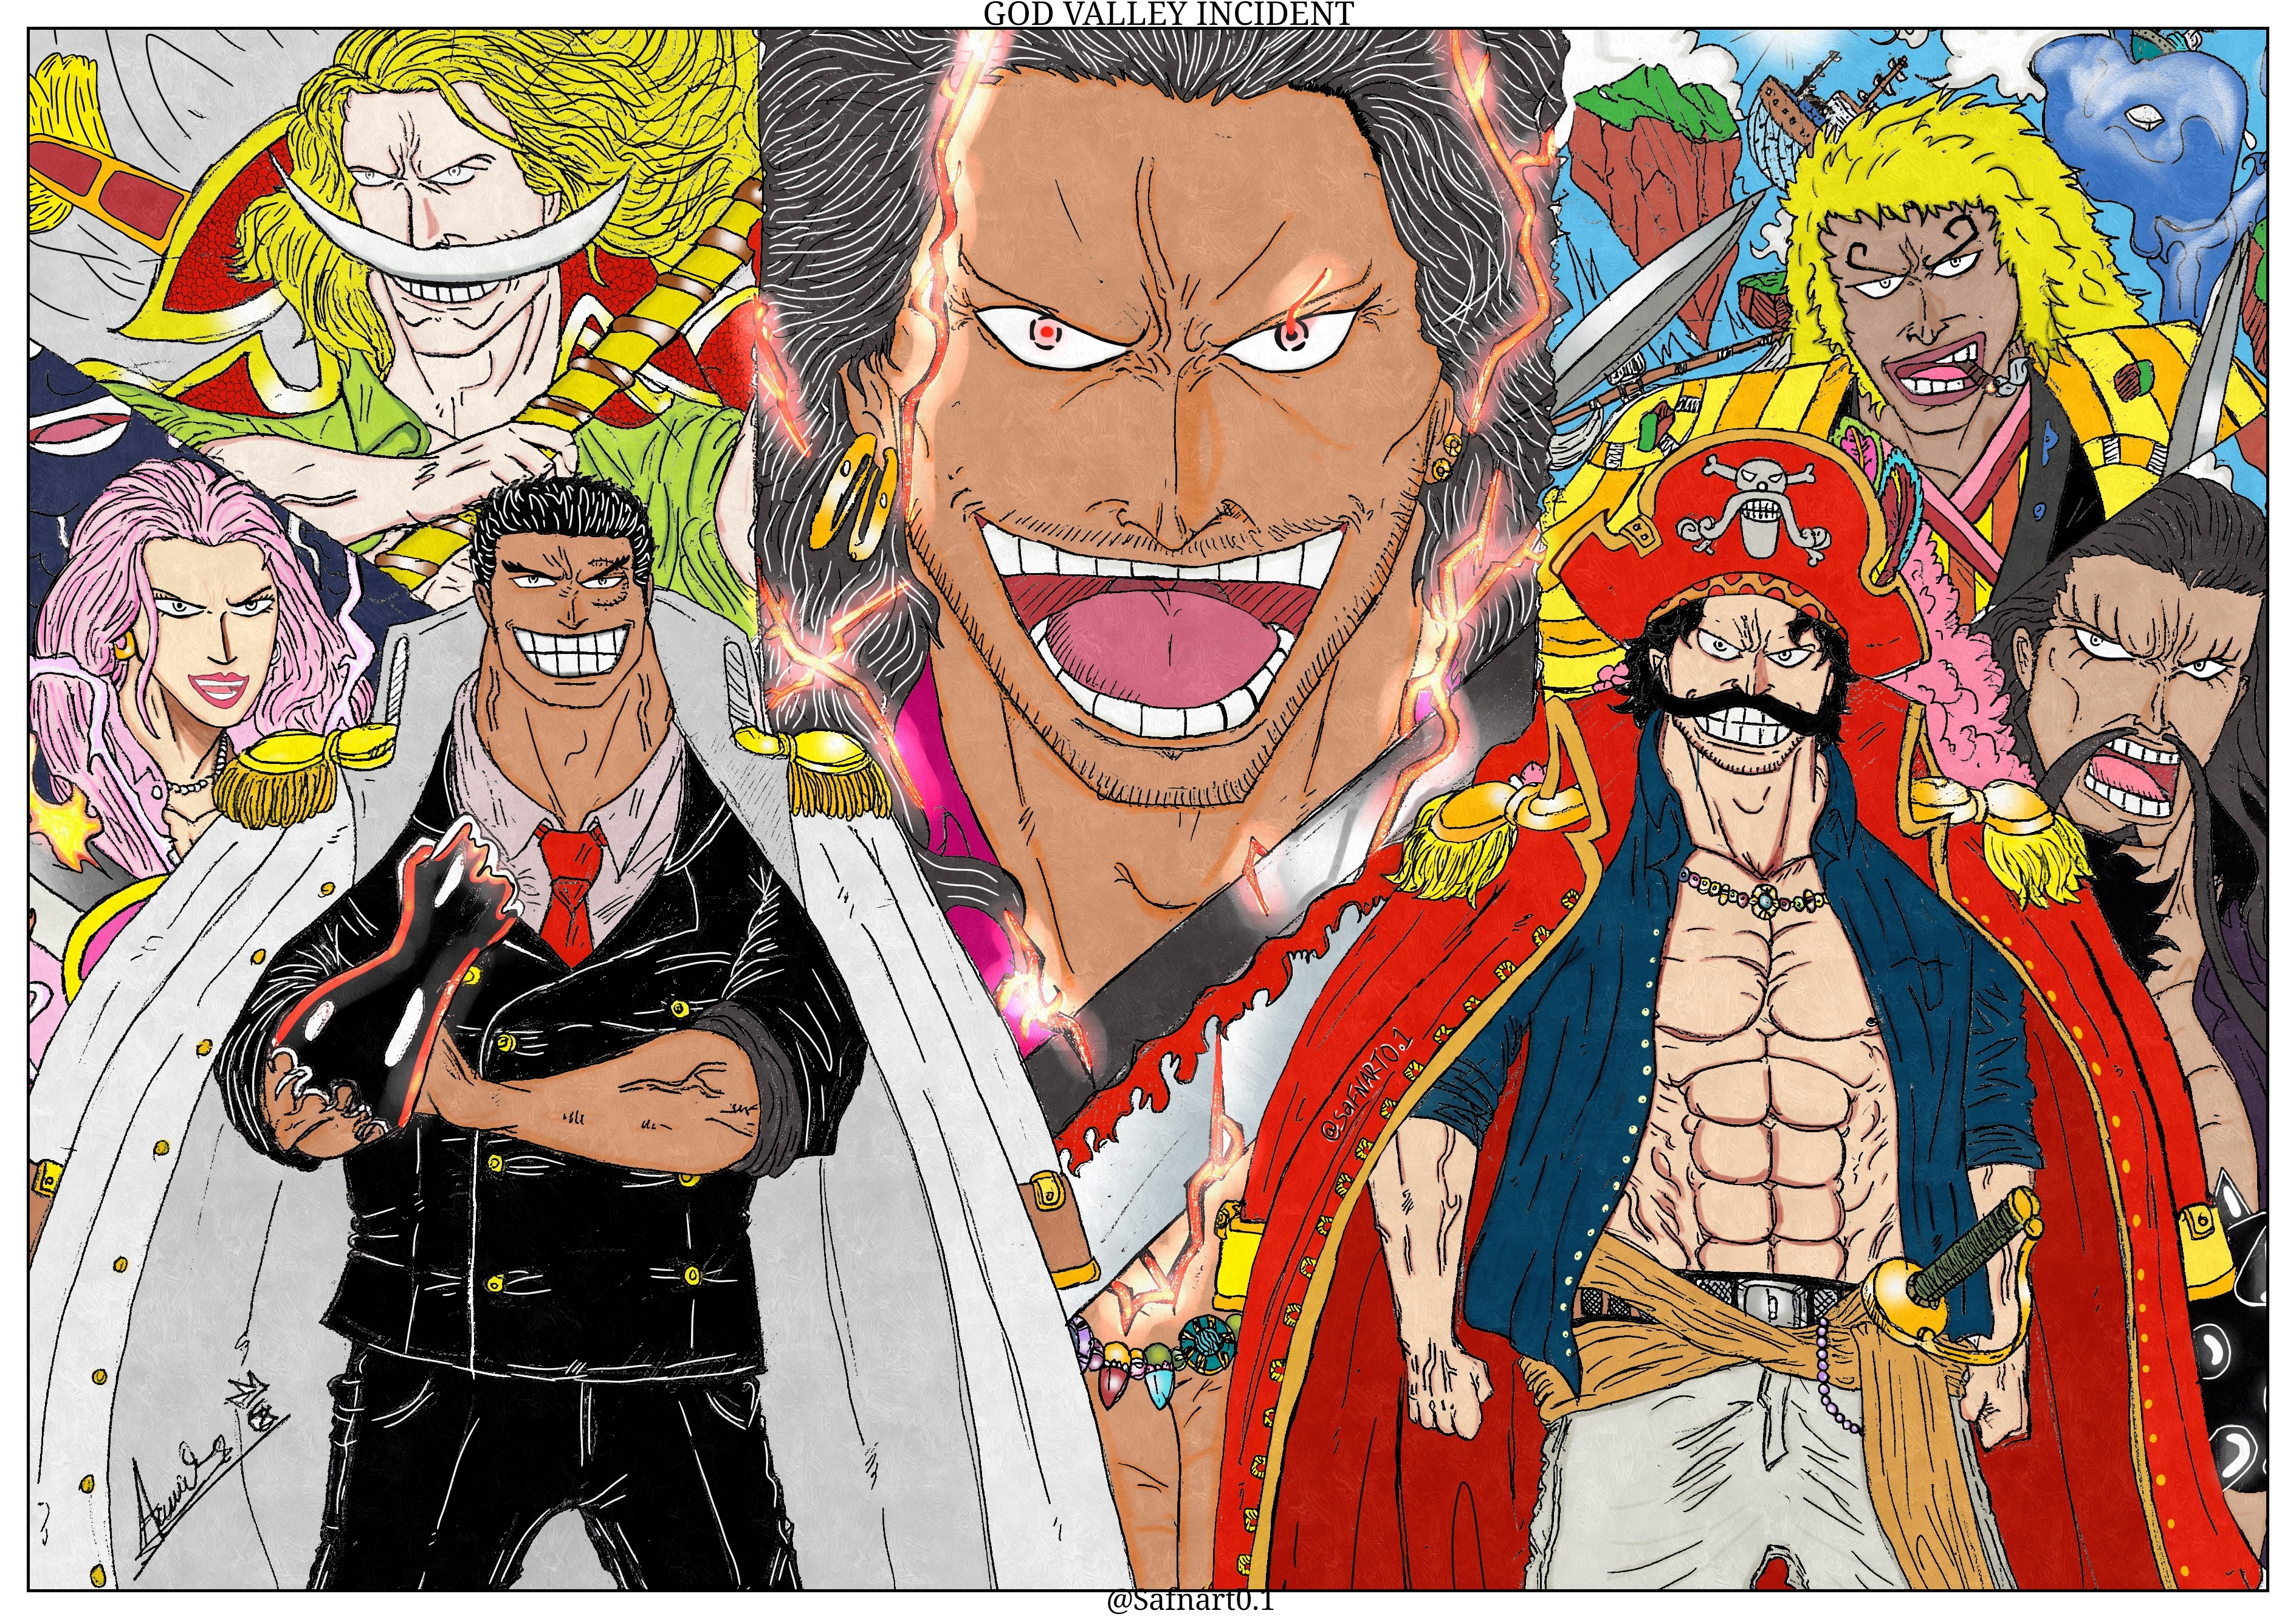 What Happened at GOD VALLEY- One Piece Discussion 